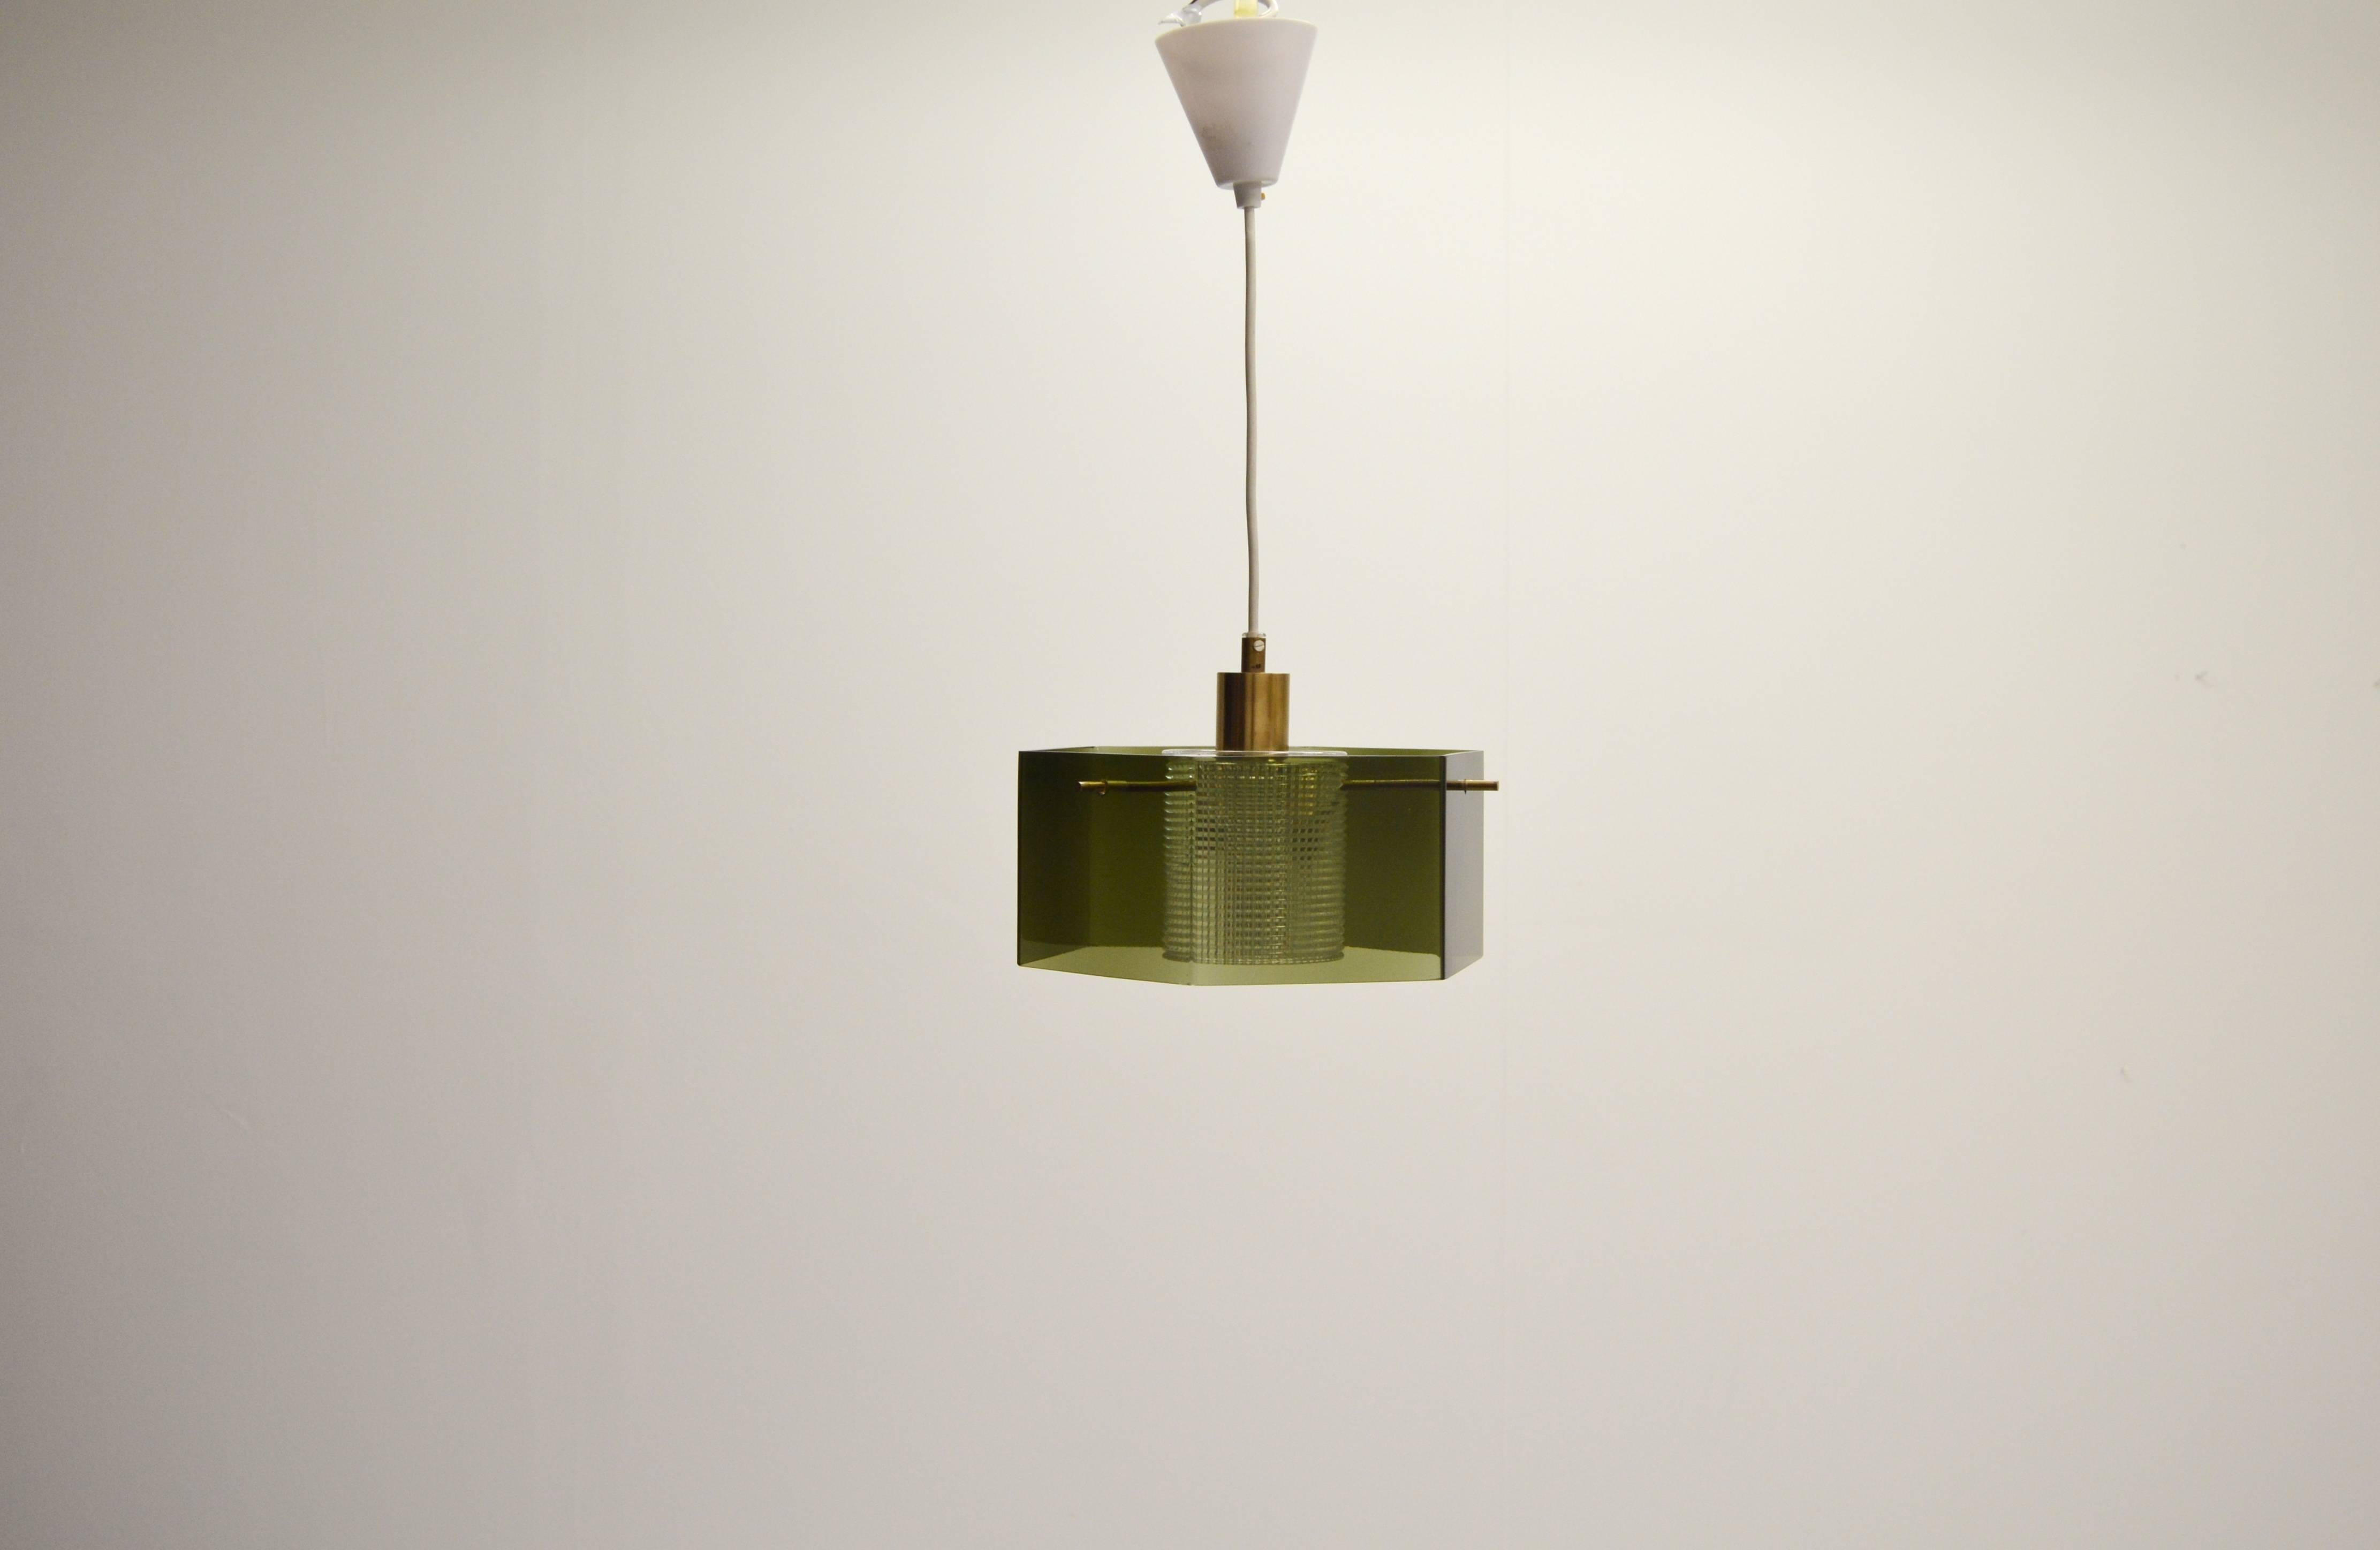 Angular glass lamp designed by Carl Fagerlund for Orrefors, Sweden.
With brass details.
The cord gives adjustable height. Height below is given for the glass and metal parts.